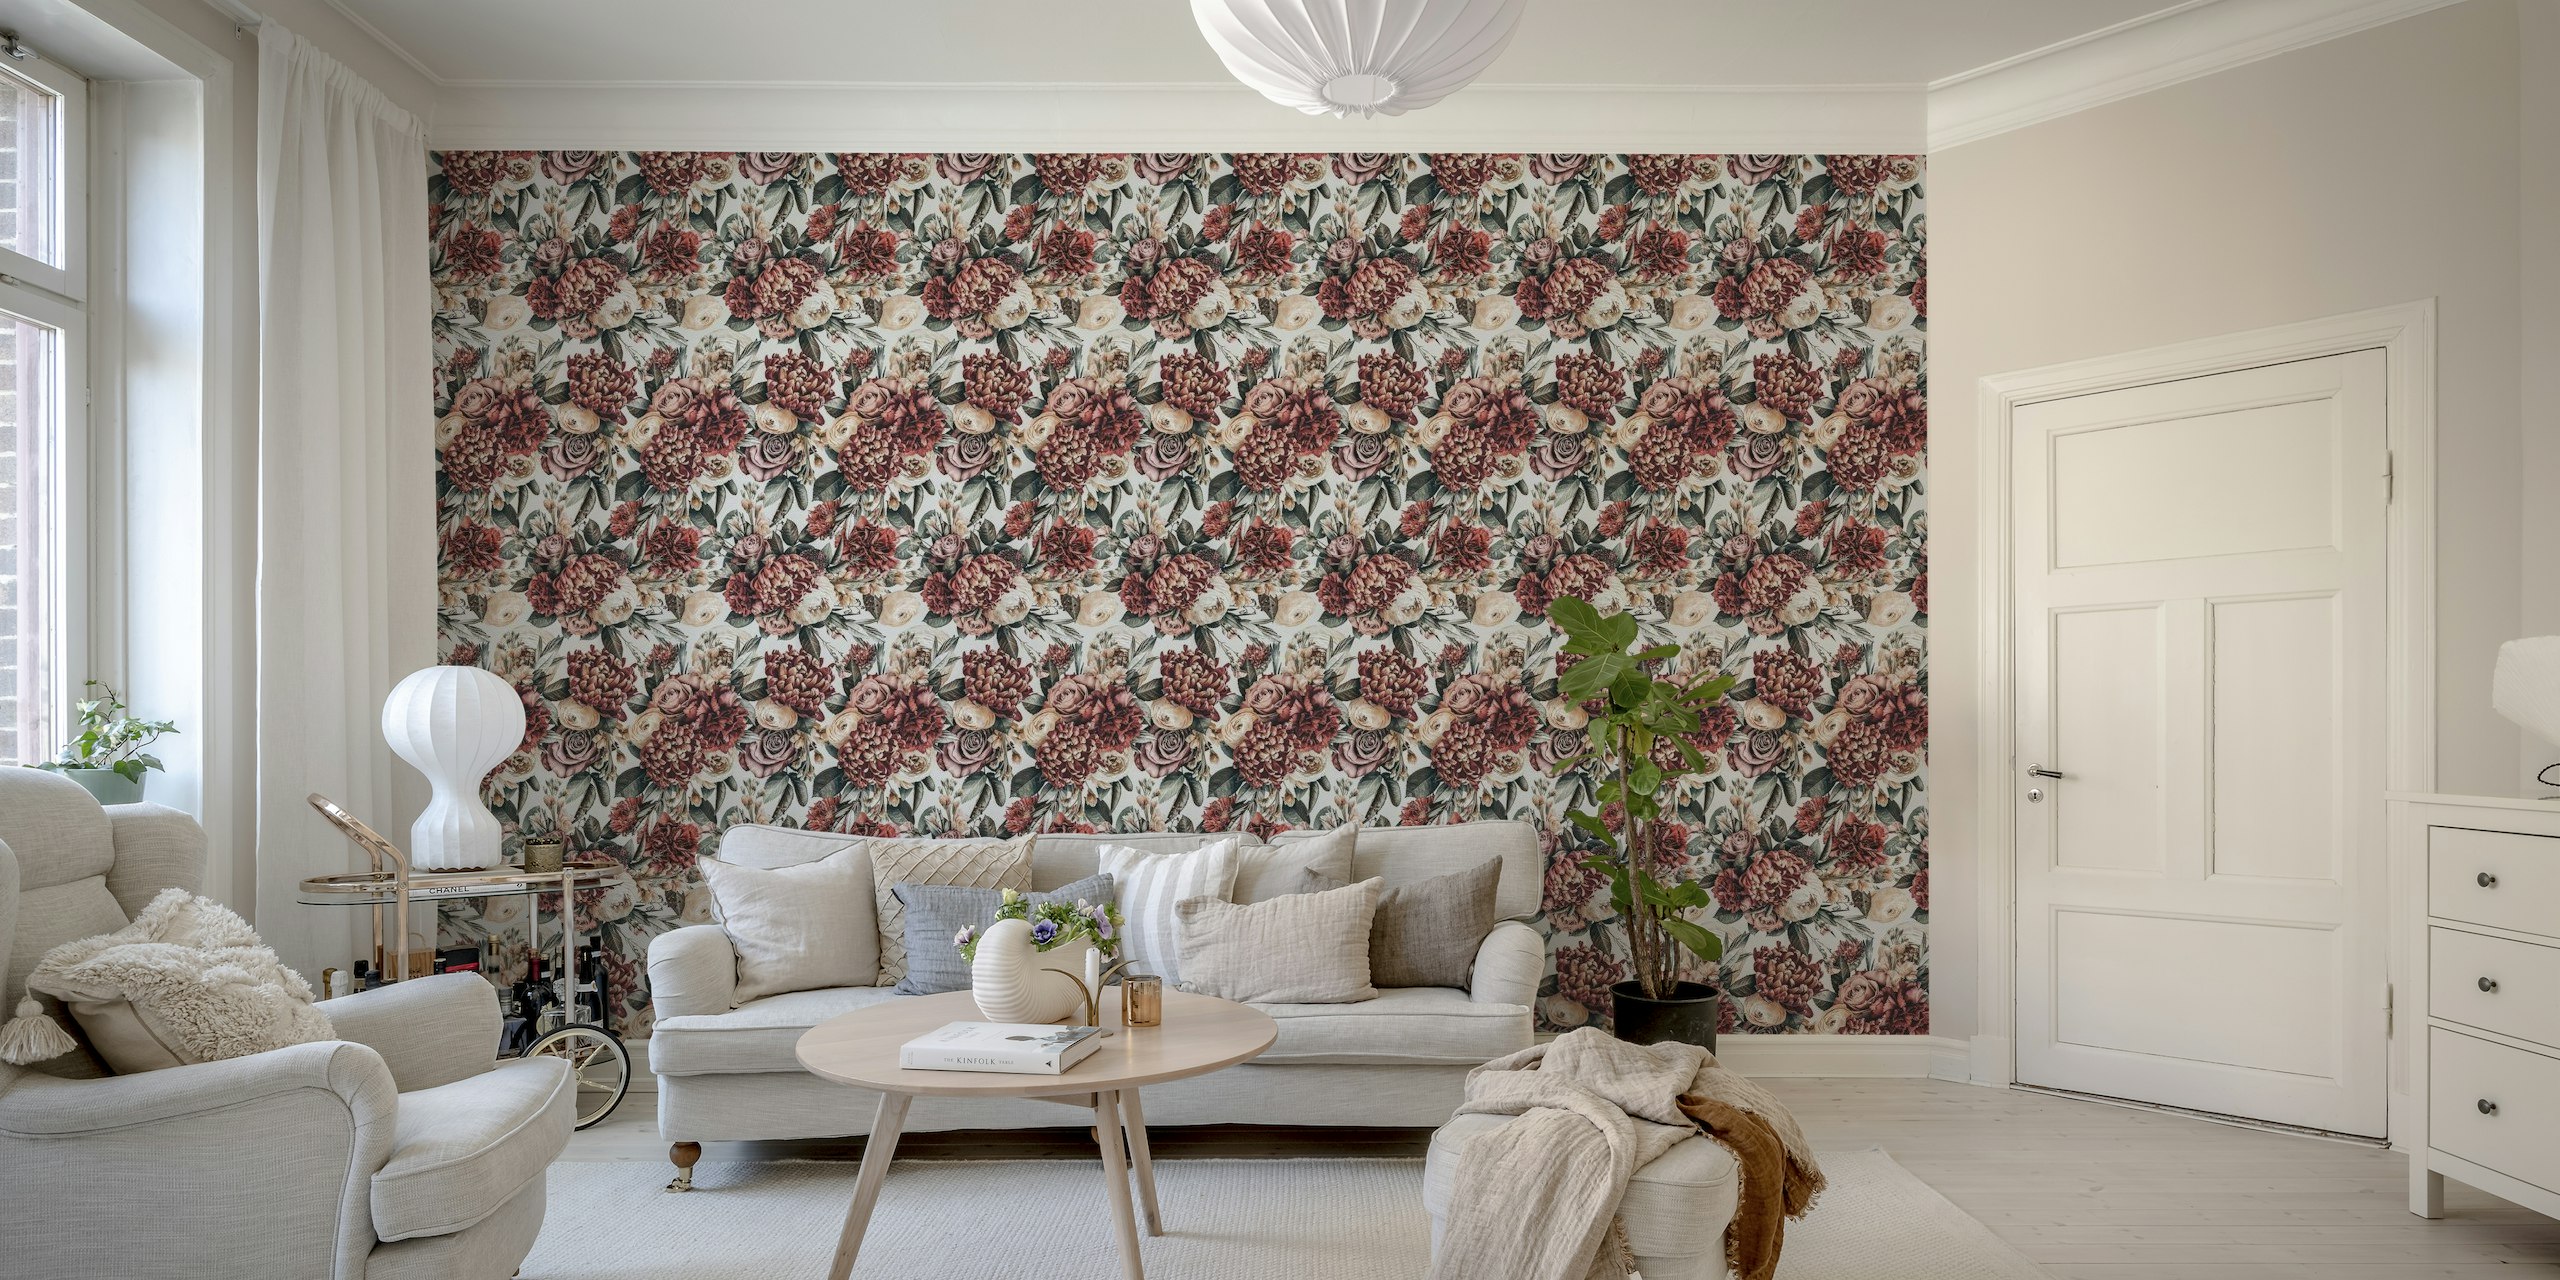 Vintage-style floral wall mural with blush pinks and deep reds